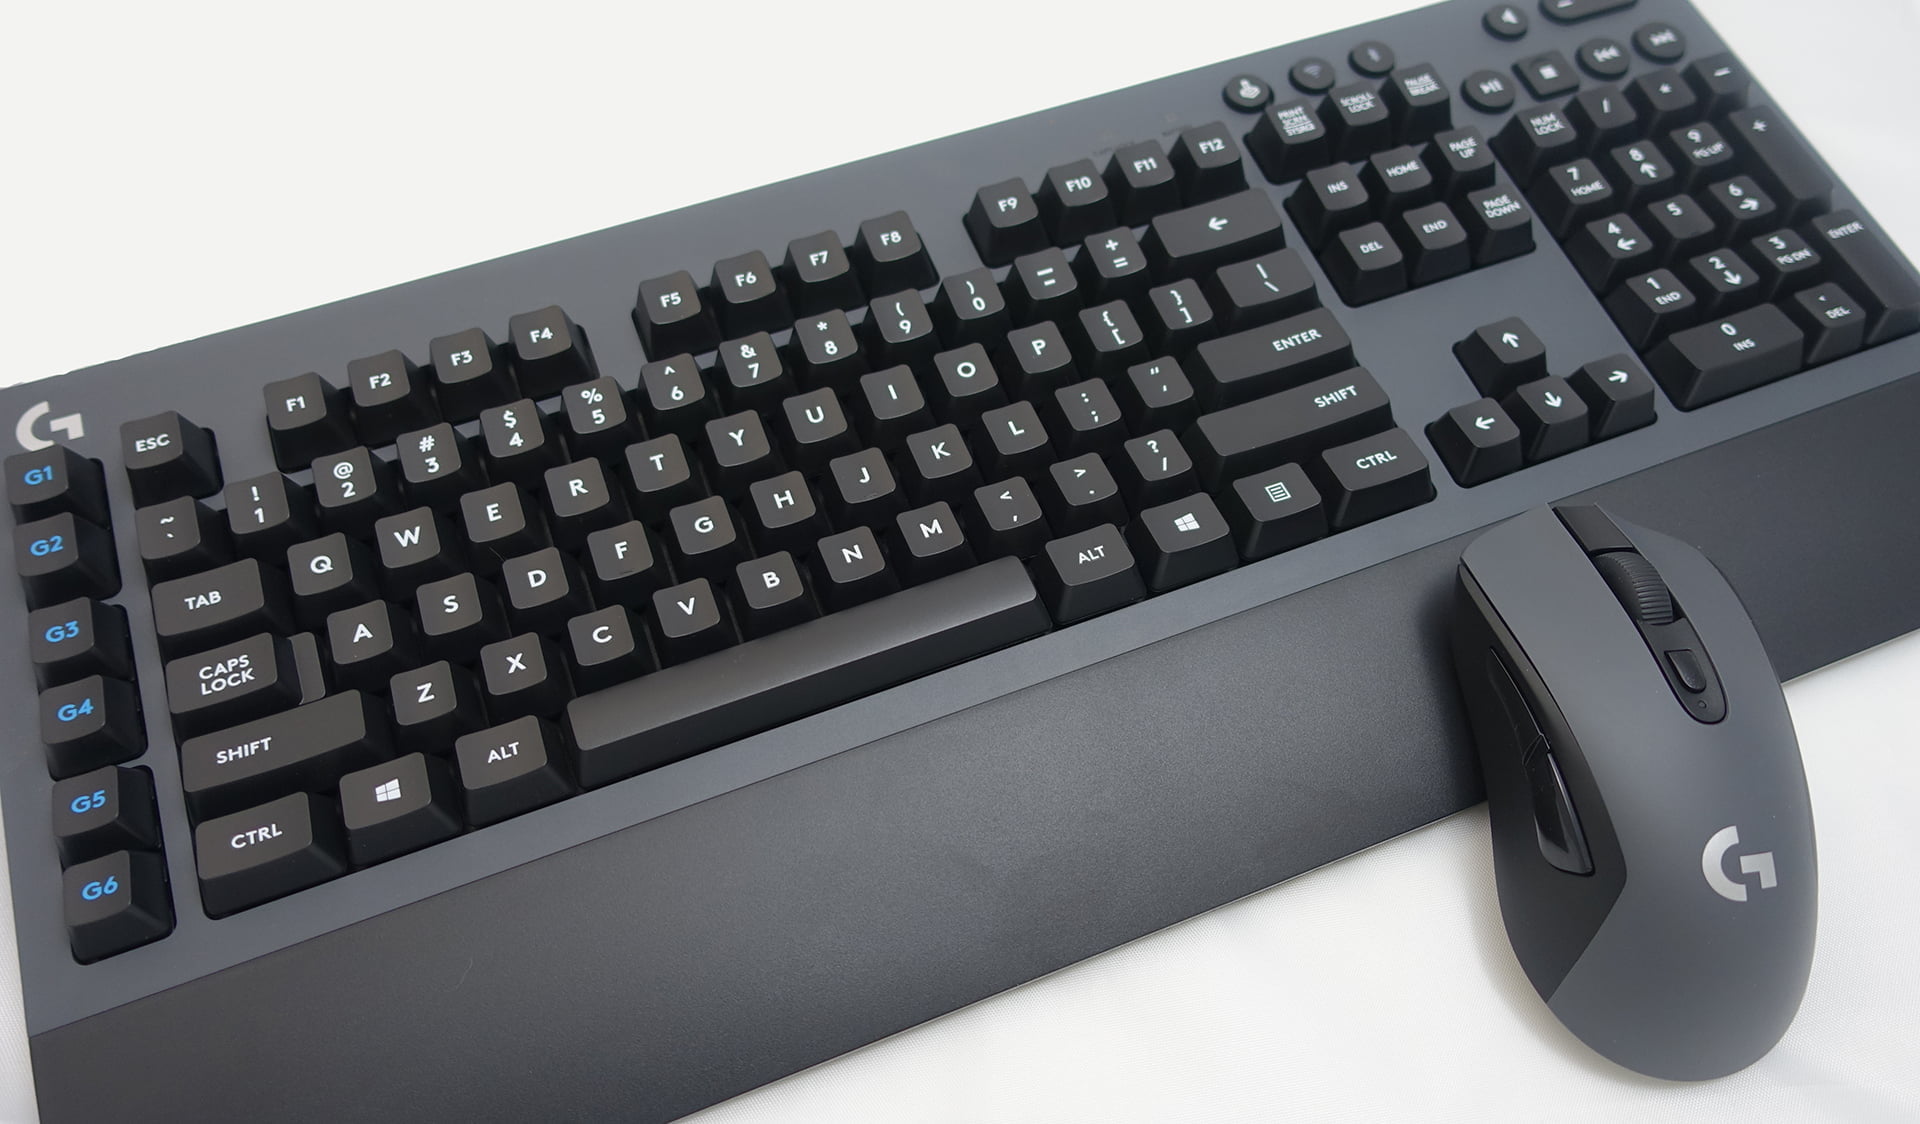 Logitech Adds New Peripherals to the G Series Line-Up